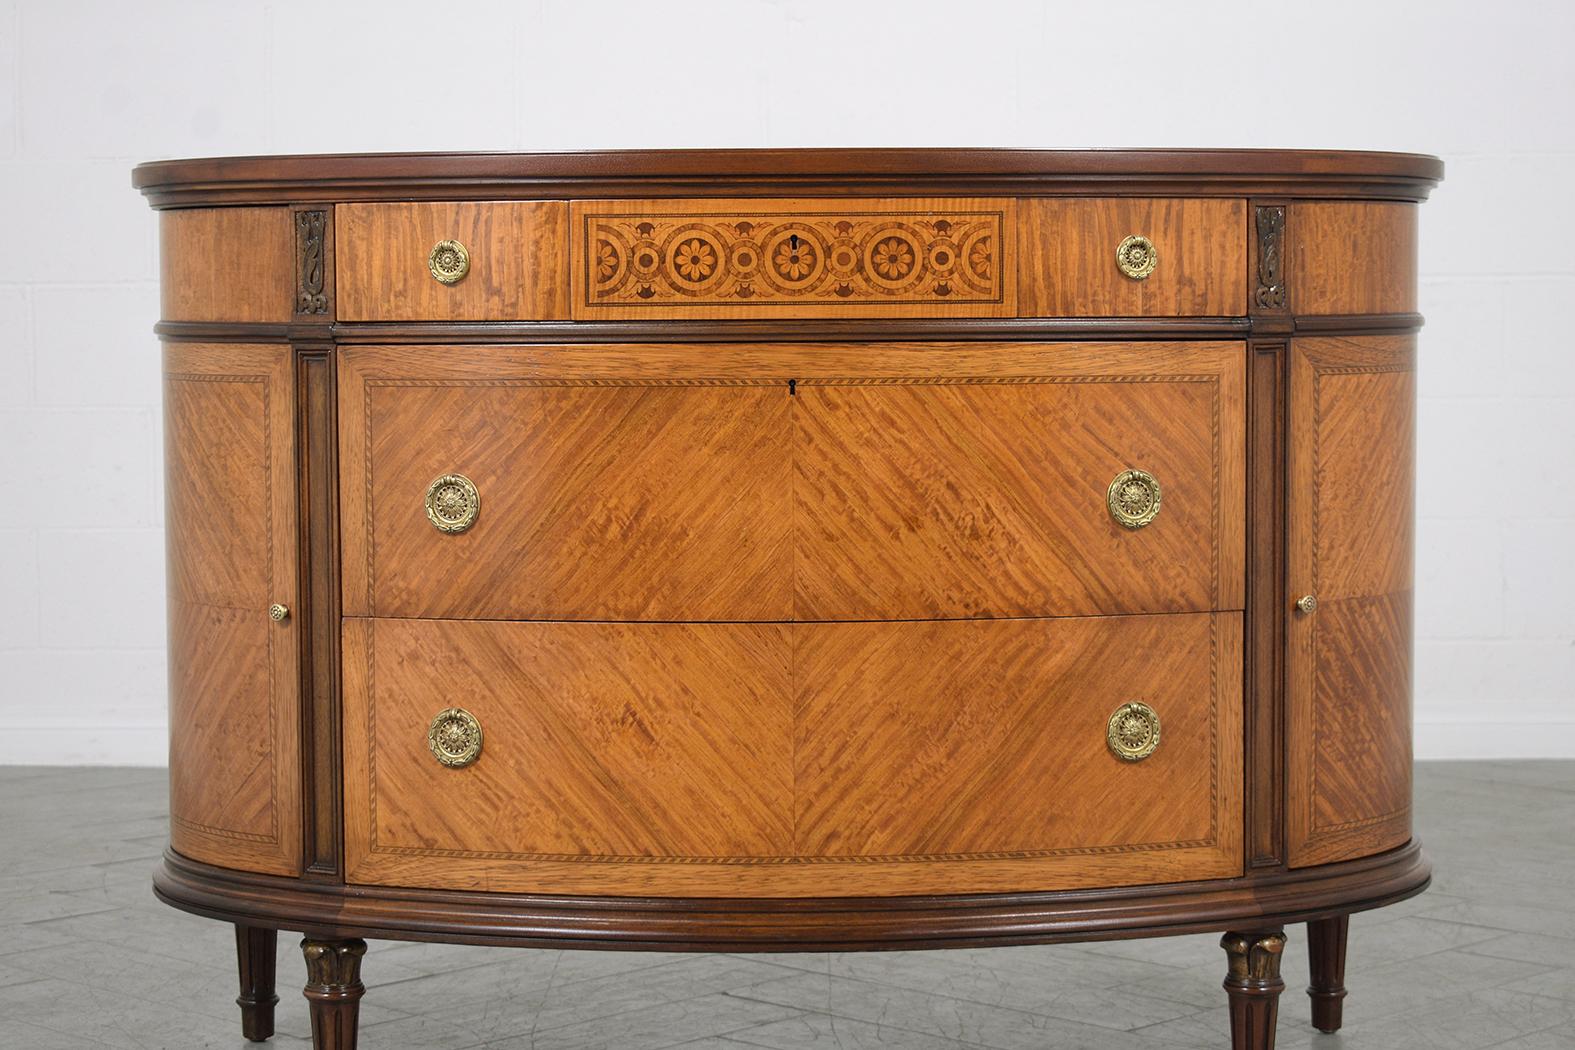 Stained 1940s Restored French Louis XVI Demilune Commode with Fruitwood Inlays & Molding